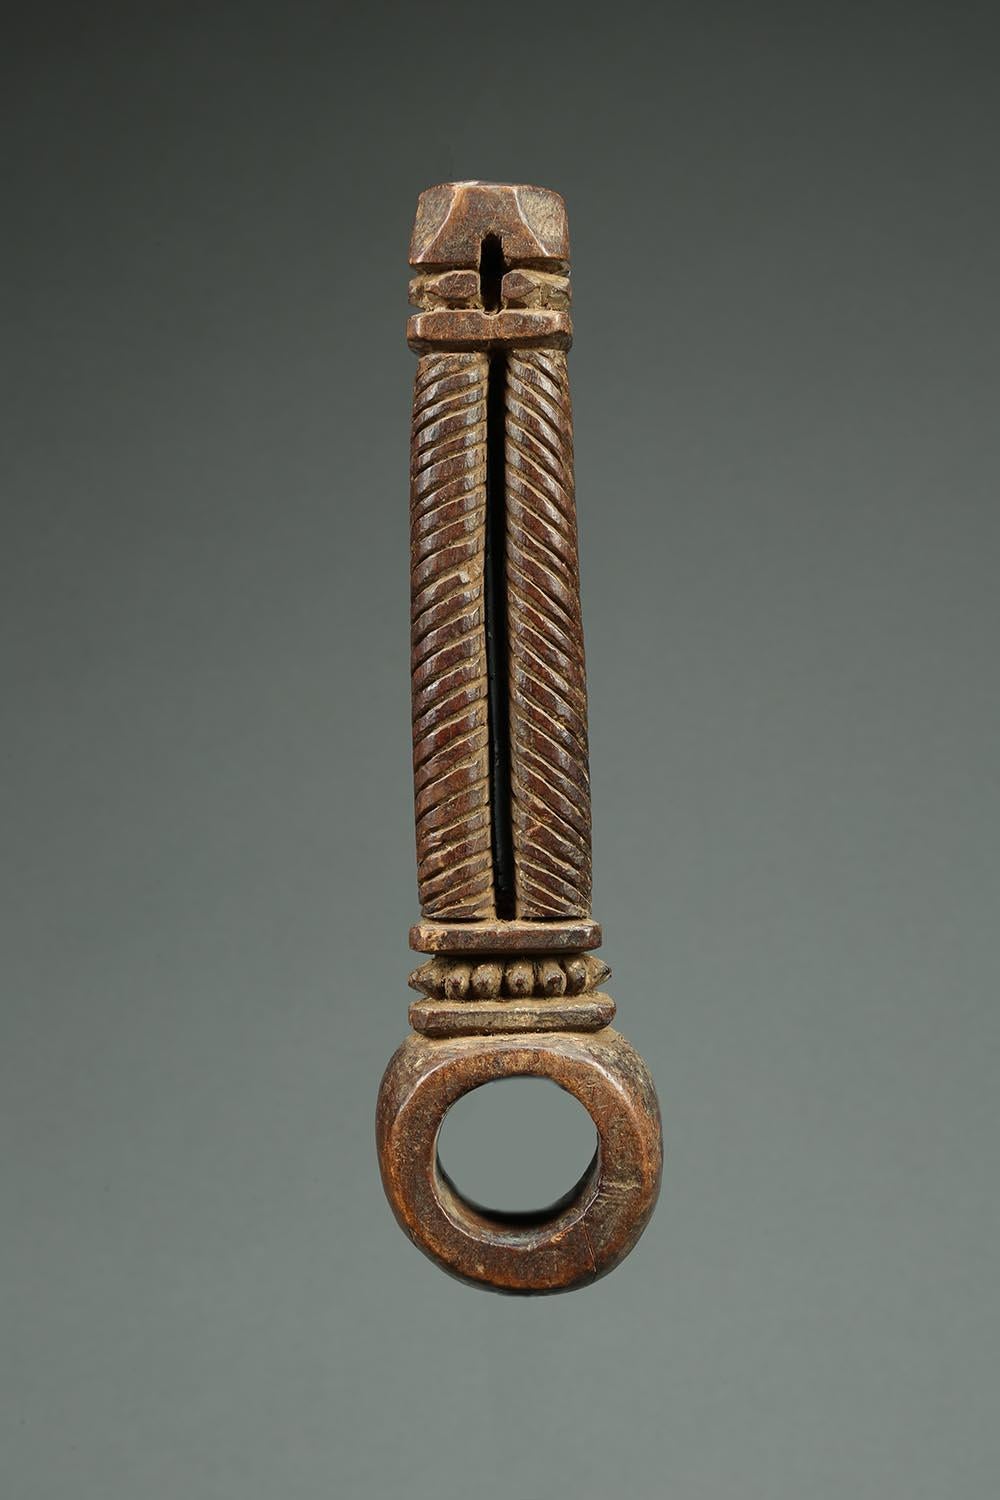 Nepal Himalayan Butter Churn Handle, Early 20th Century with Columns 1